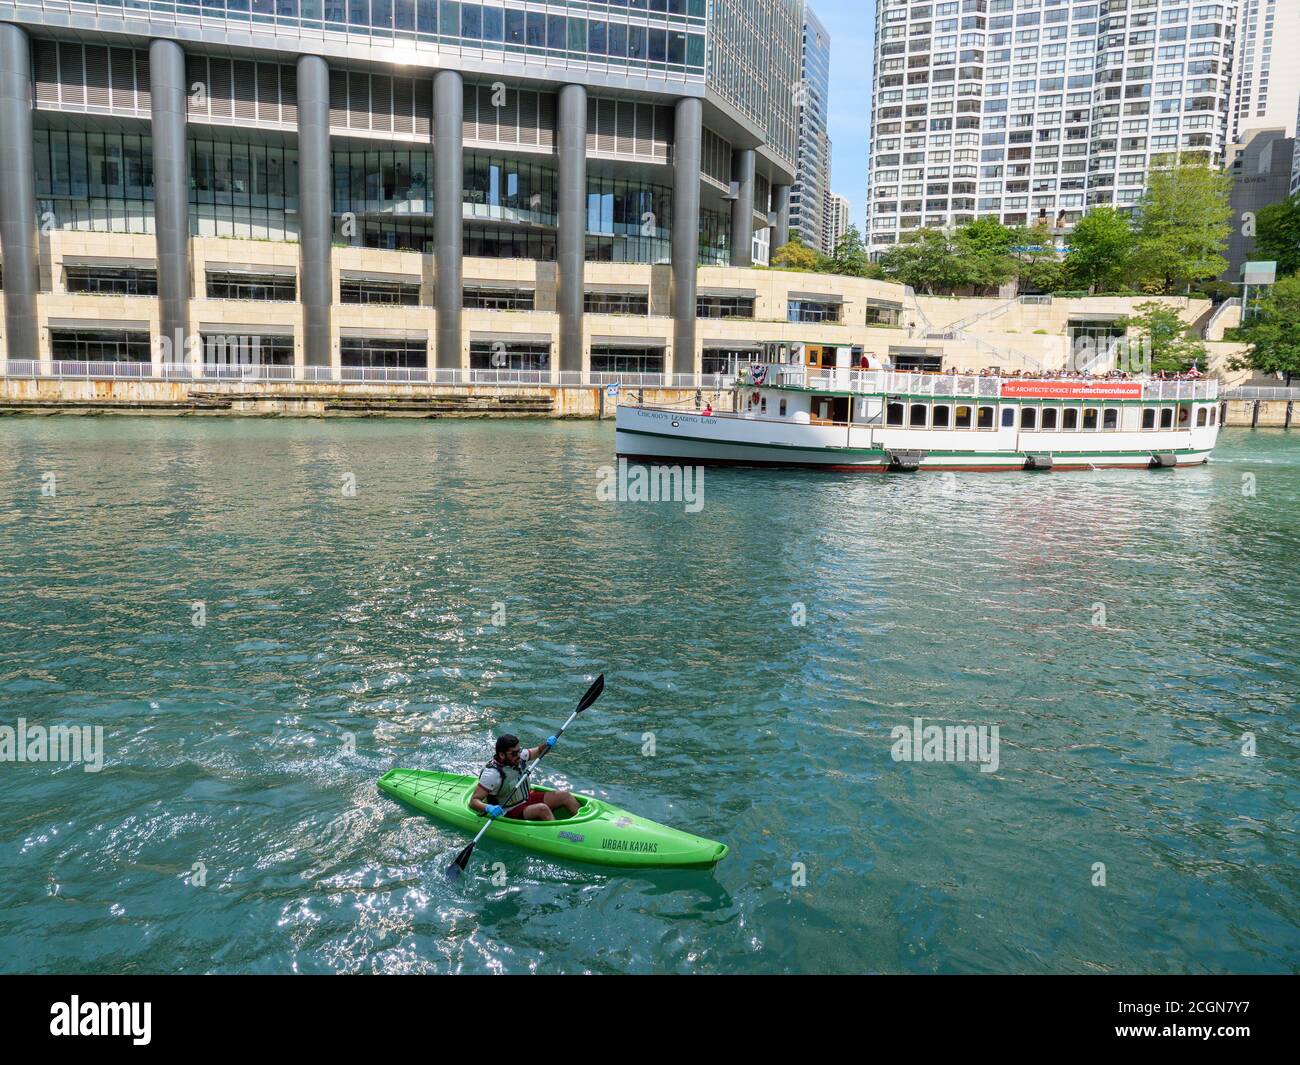 Kayak River Chicago High Resolution Stock Photography and Images - Alamy